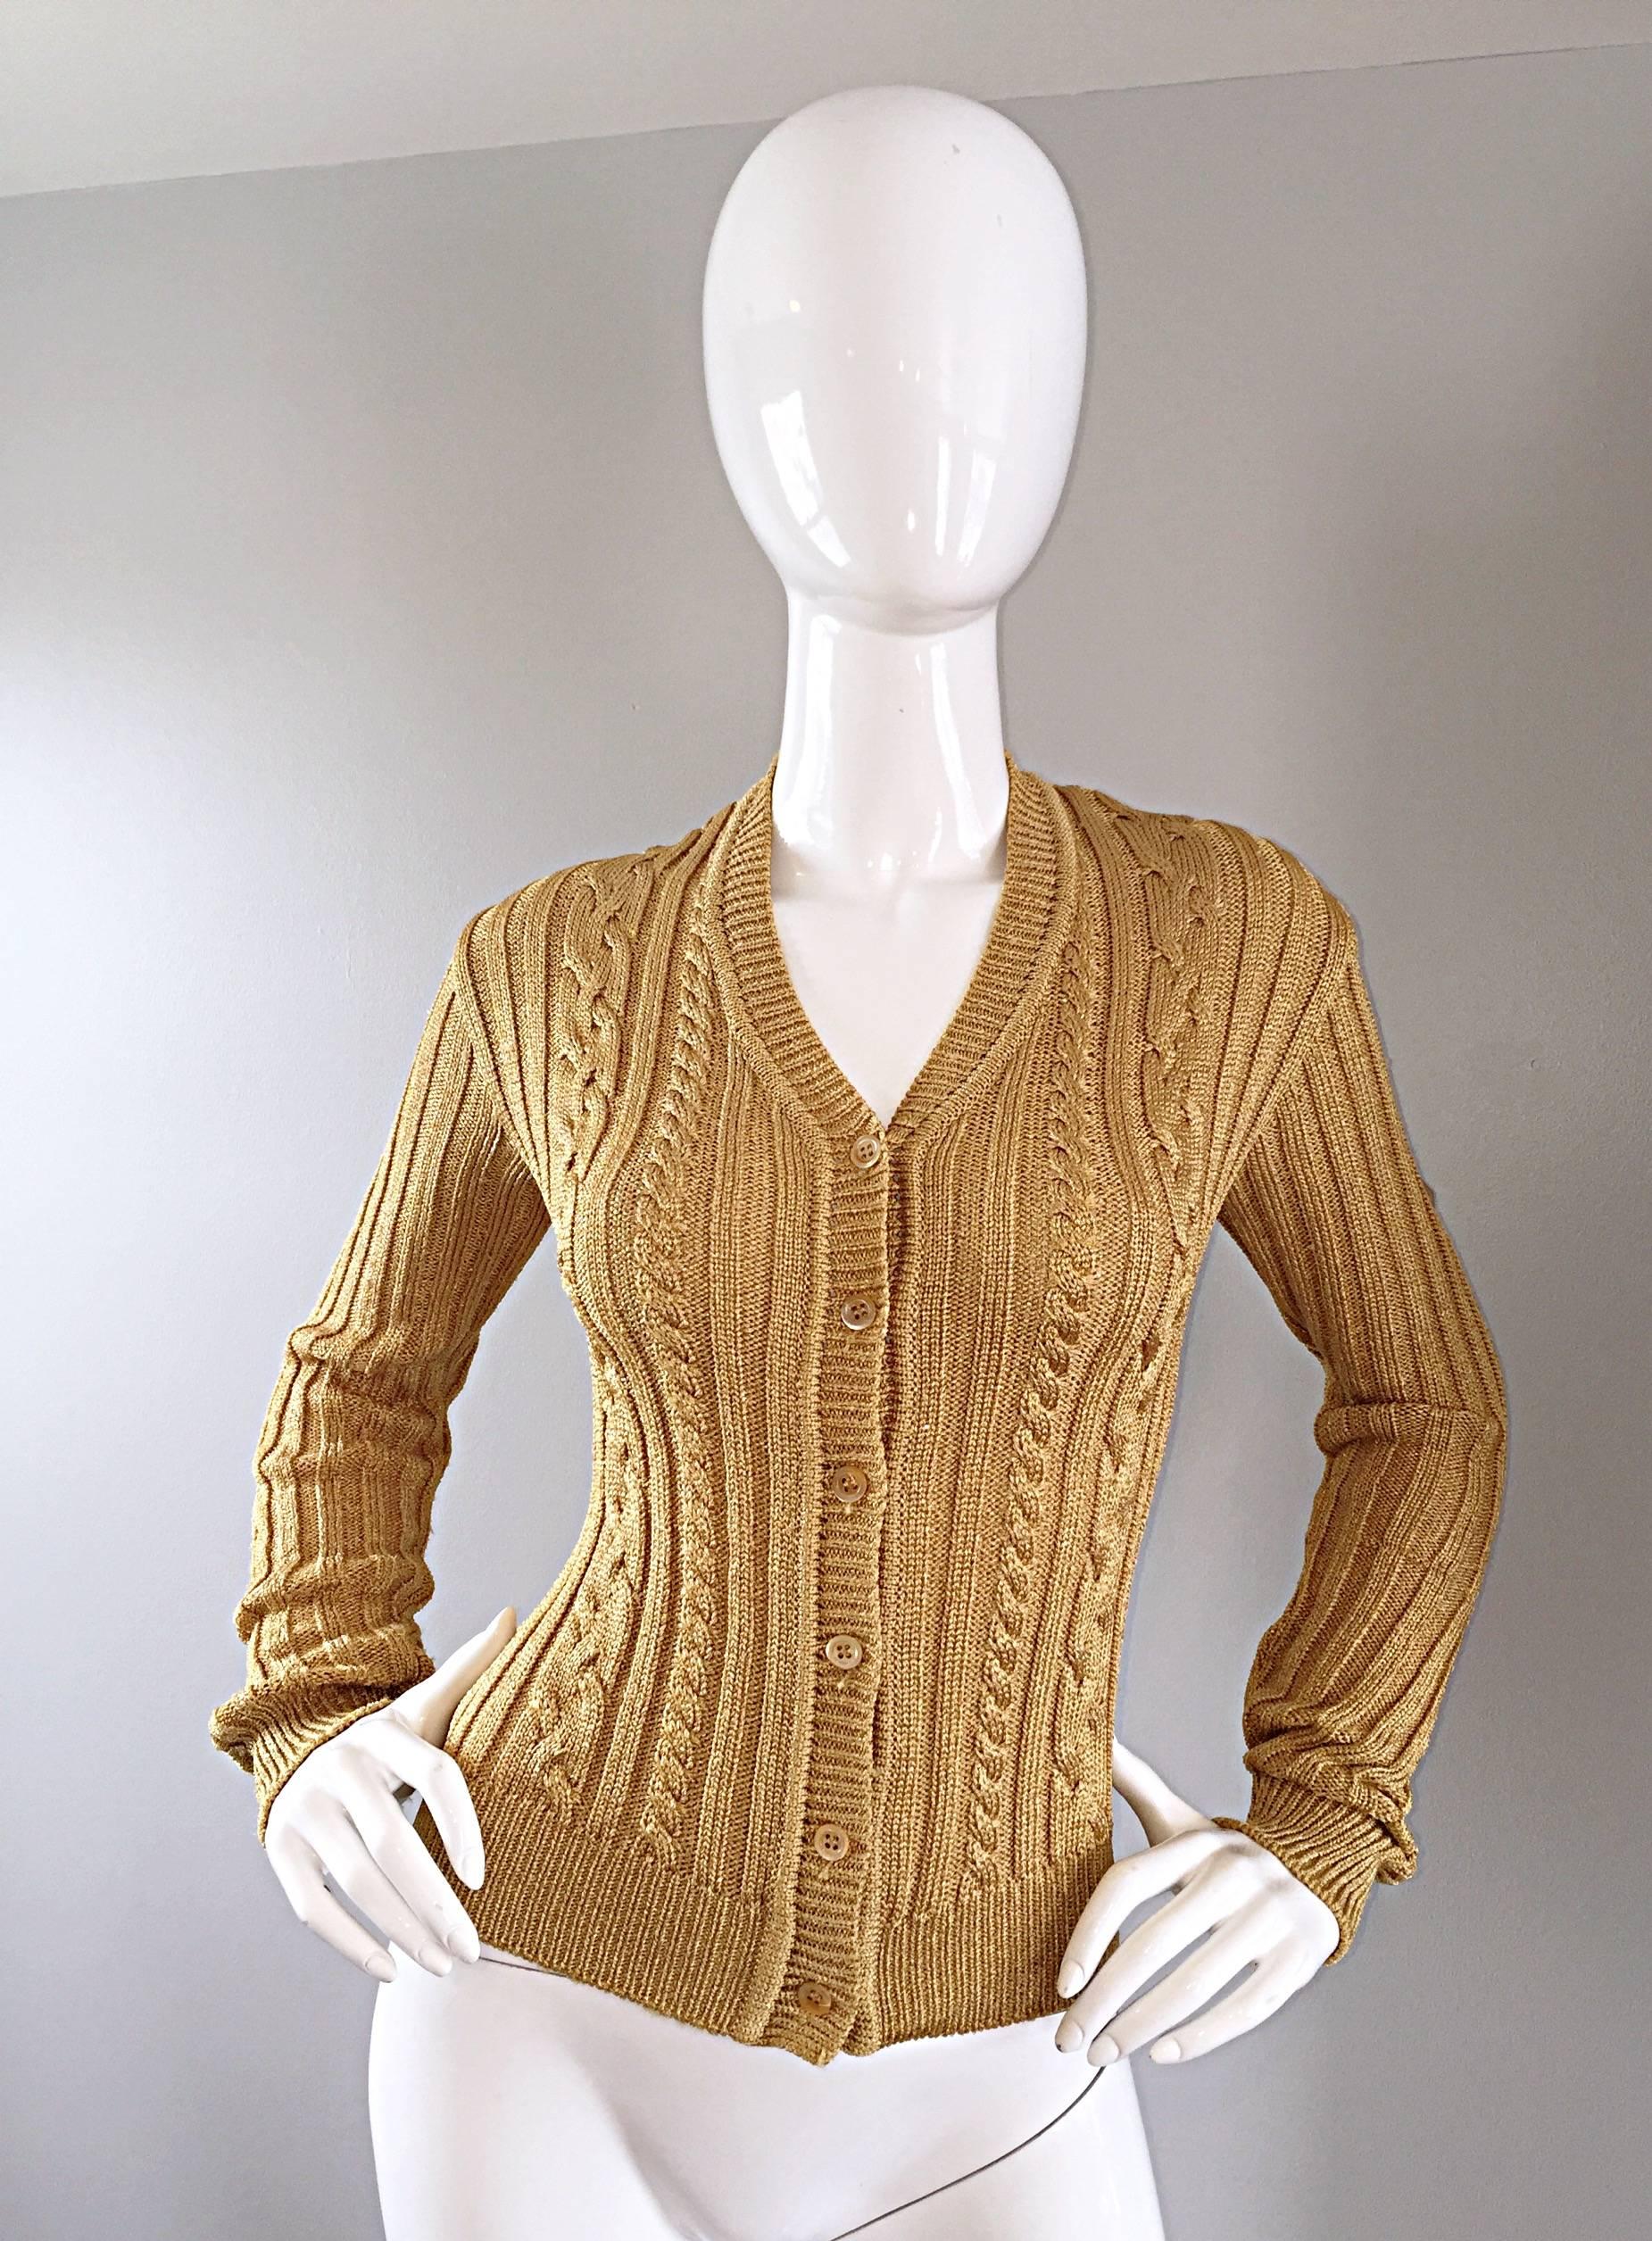 Classic 90s MOSCHINO CHEAP & CHIC gold metallic ribbed cardigan! Such a great twist on the classic cardigan! Muted gold color is a wonderful neutral that literally matches everything, and is perfect all year! The perfect weight to add over a tank